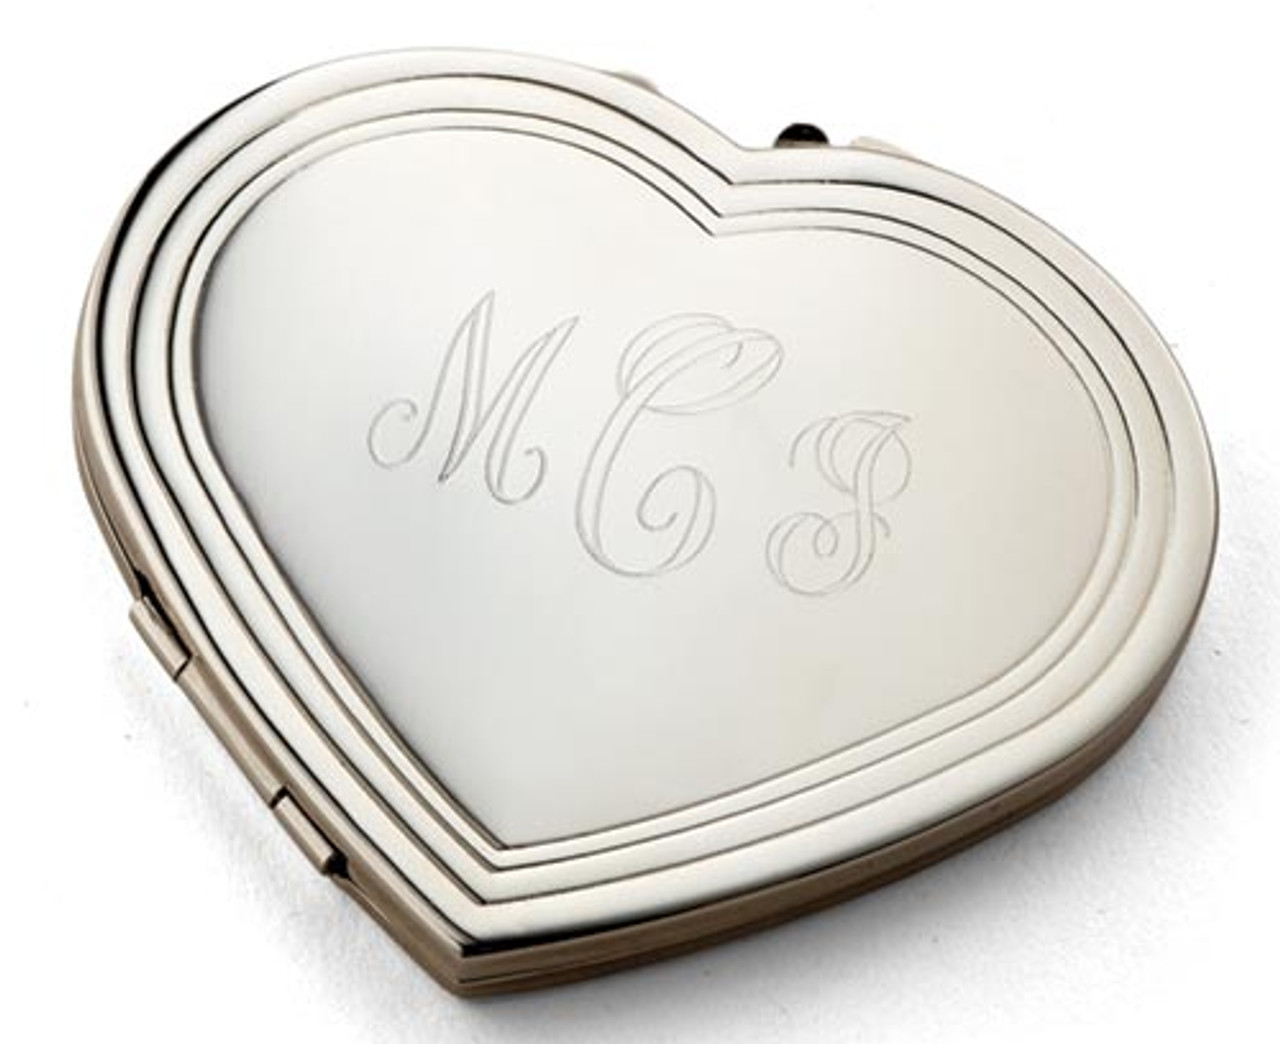 Personalized Heart Compact Mirror - Free Engraving - ForeverGifts.com